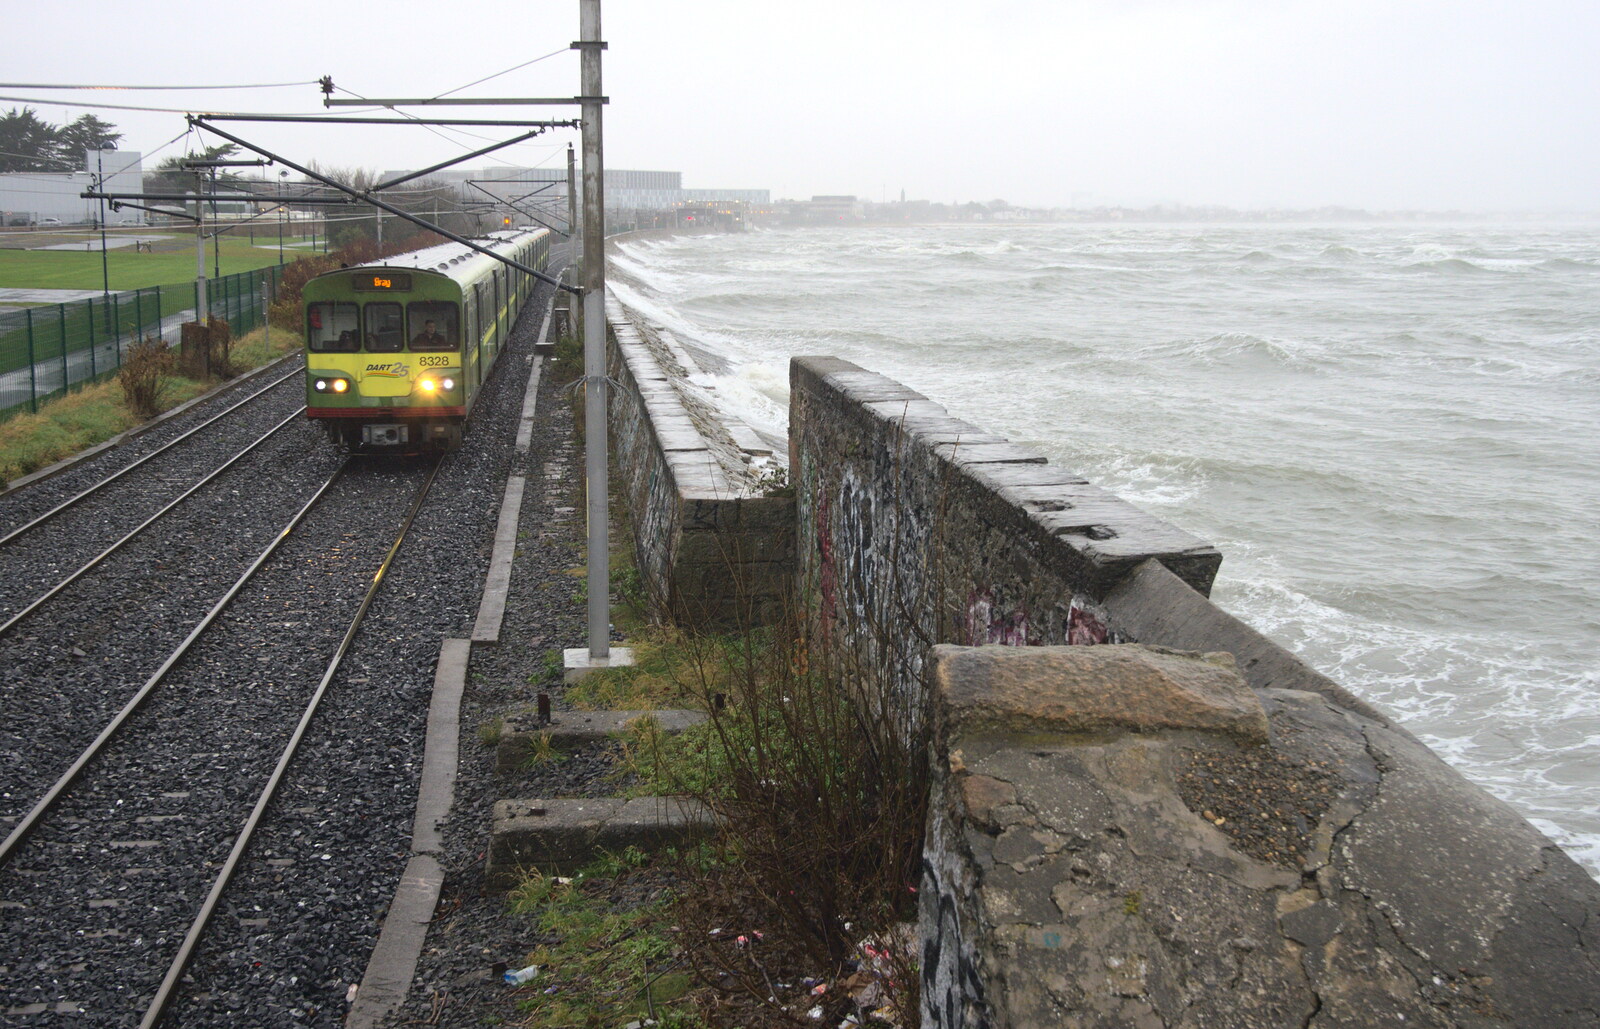 A DART train heads down the coast to Bray from A Night on the Lash, Dublin, Ireland - 14th December 2012